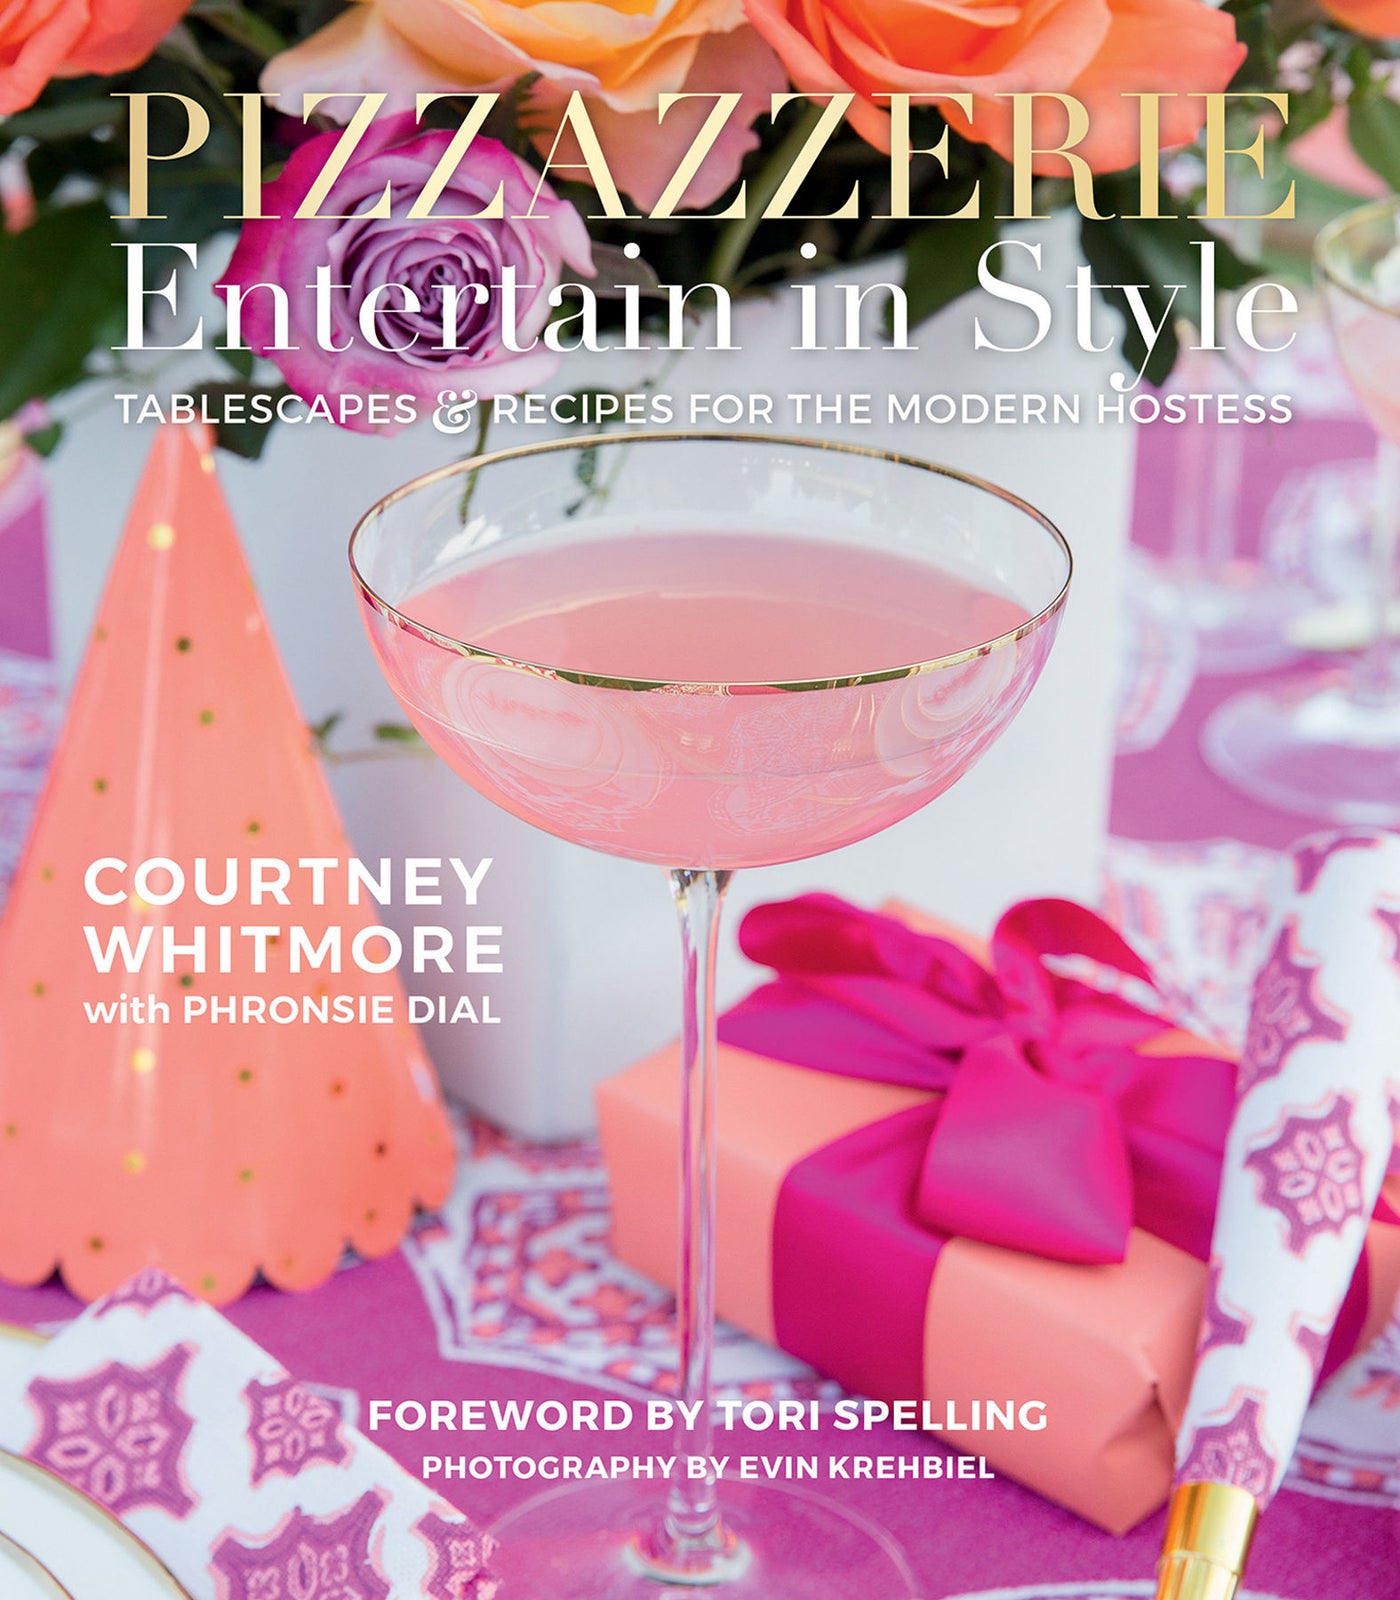 Pizzazzerie: Entertain in Style